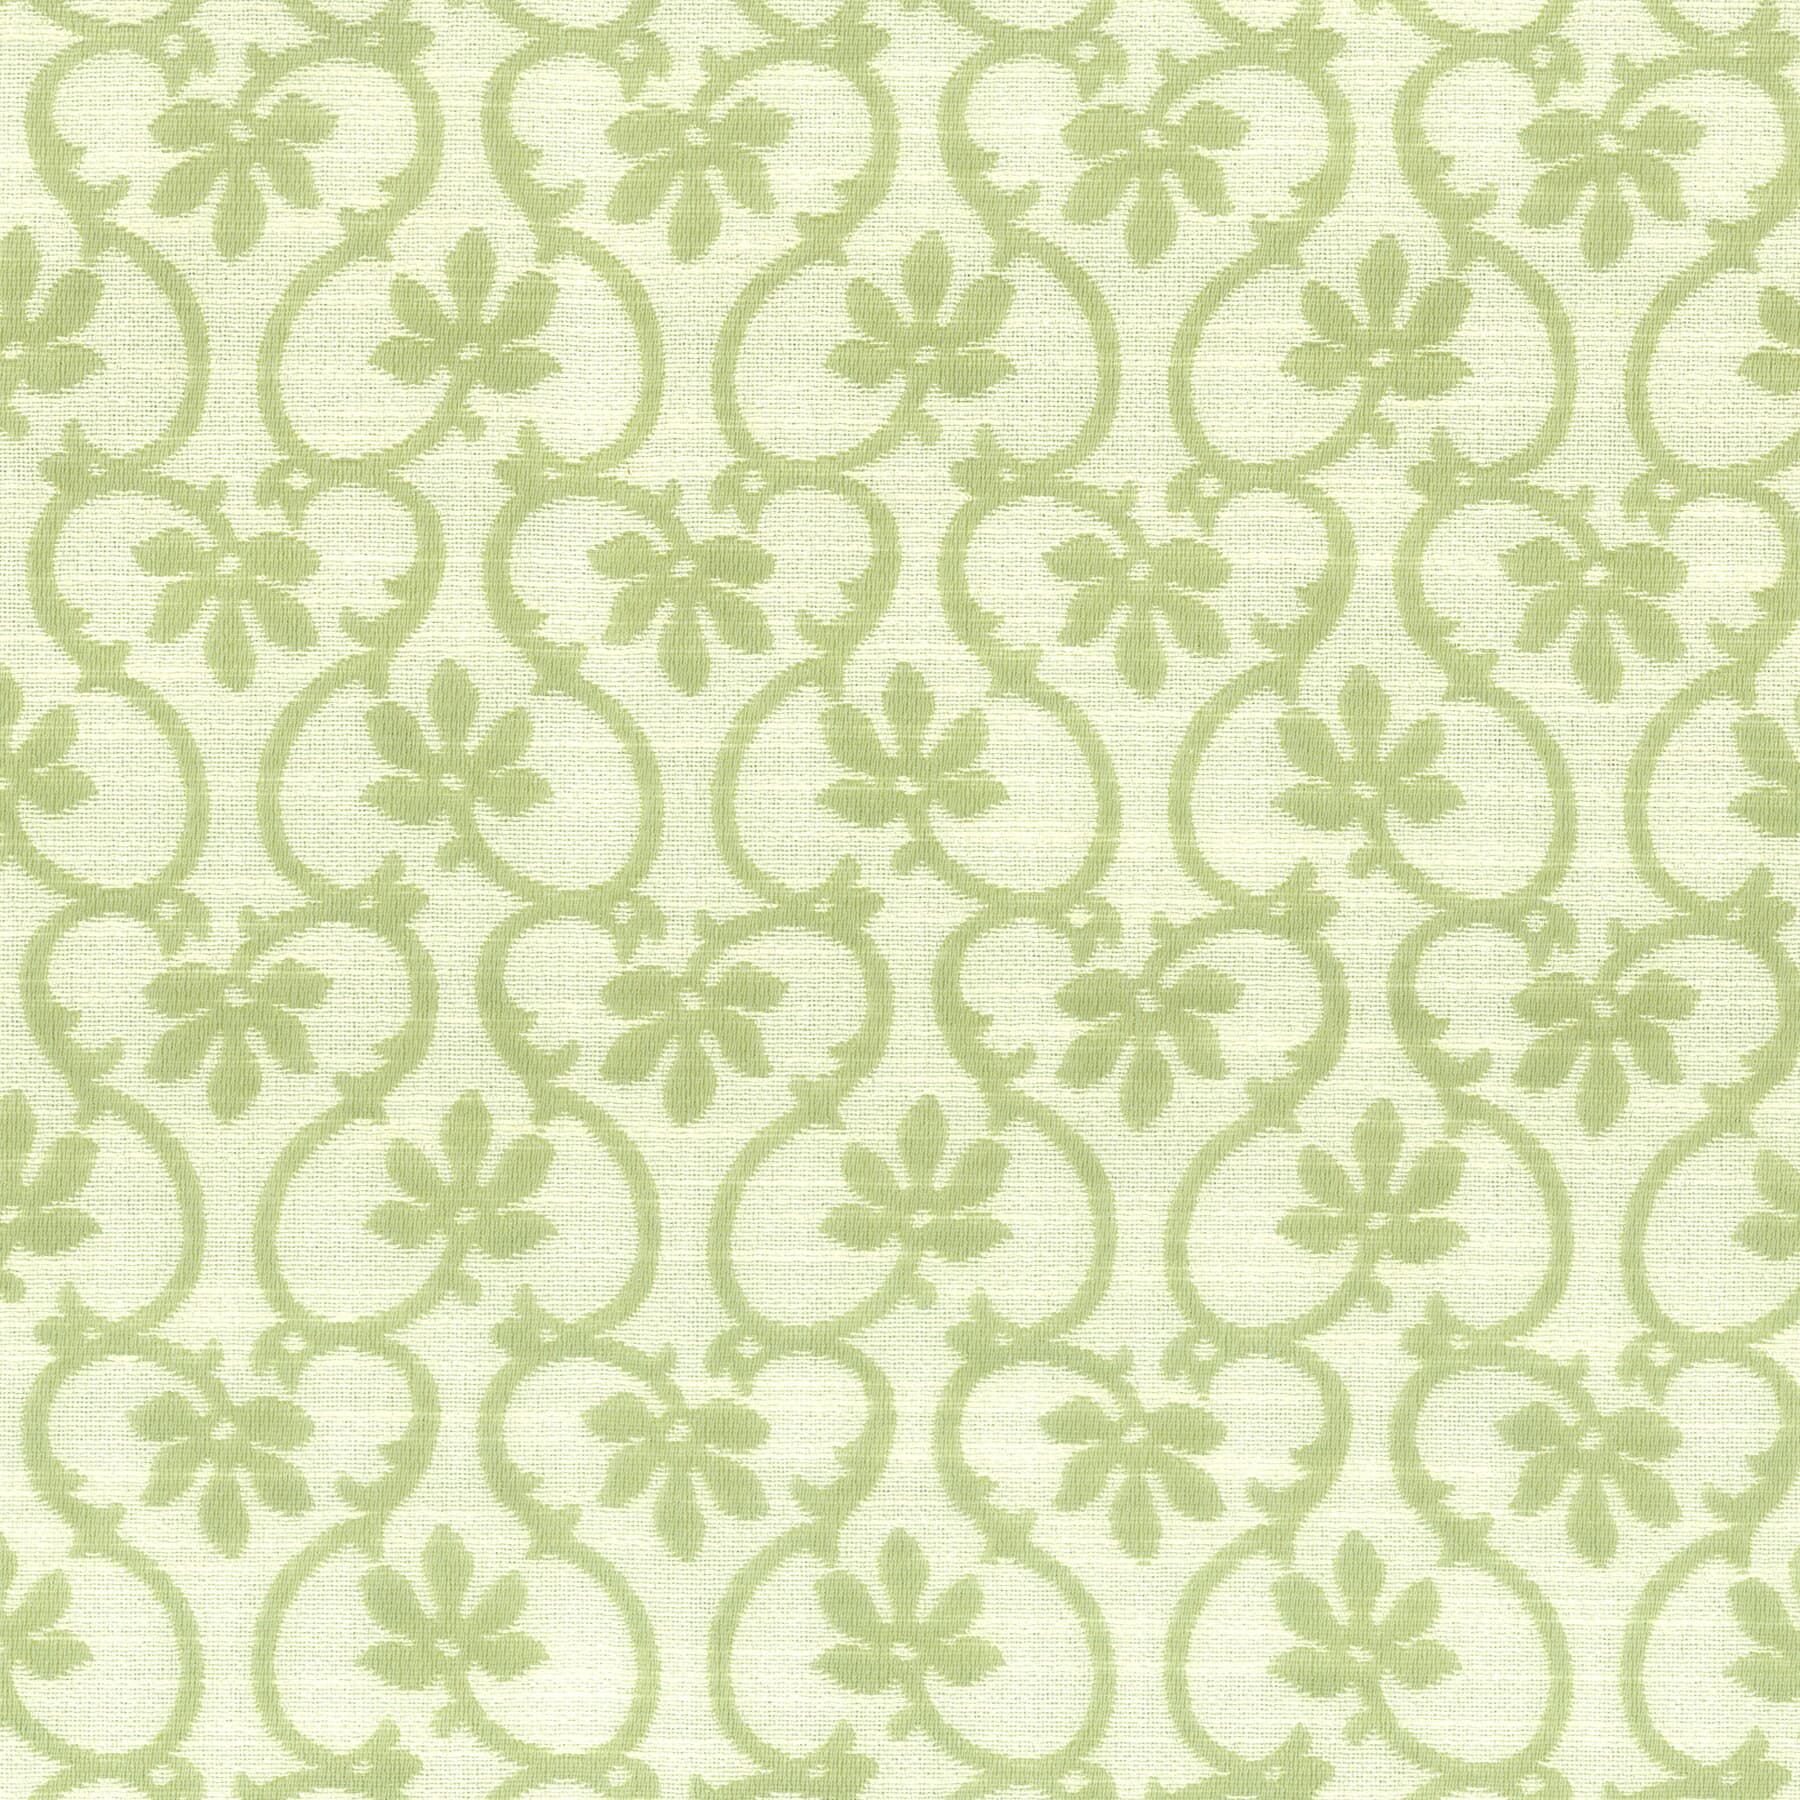 7615-15 Floral Scroll by Stout Fabric